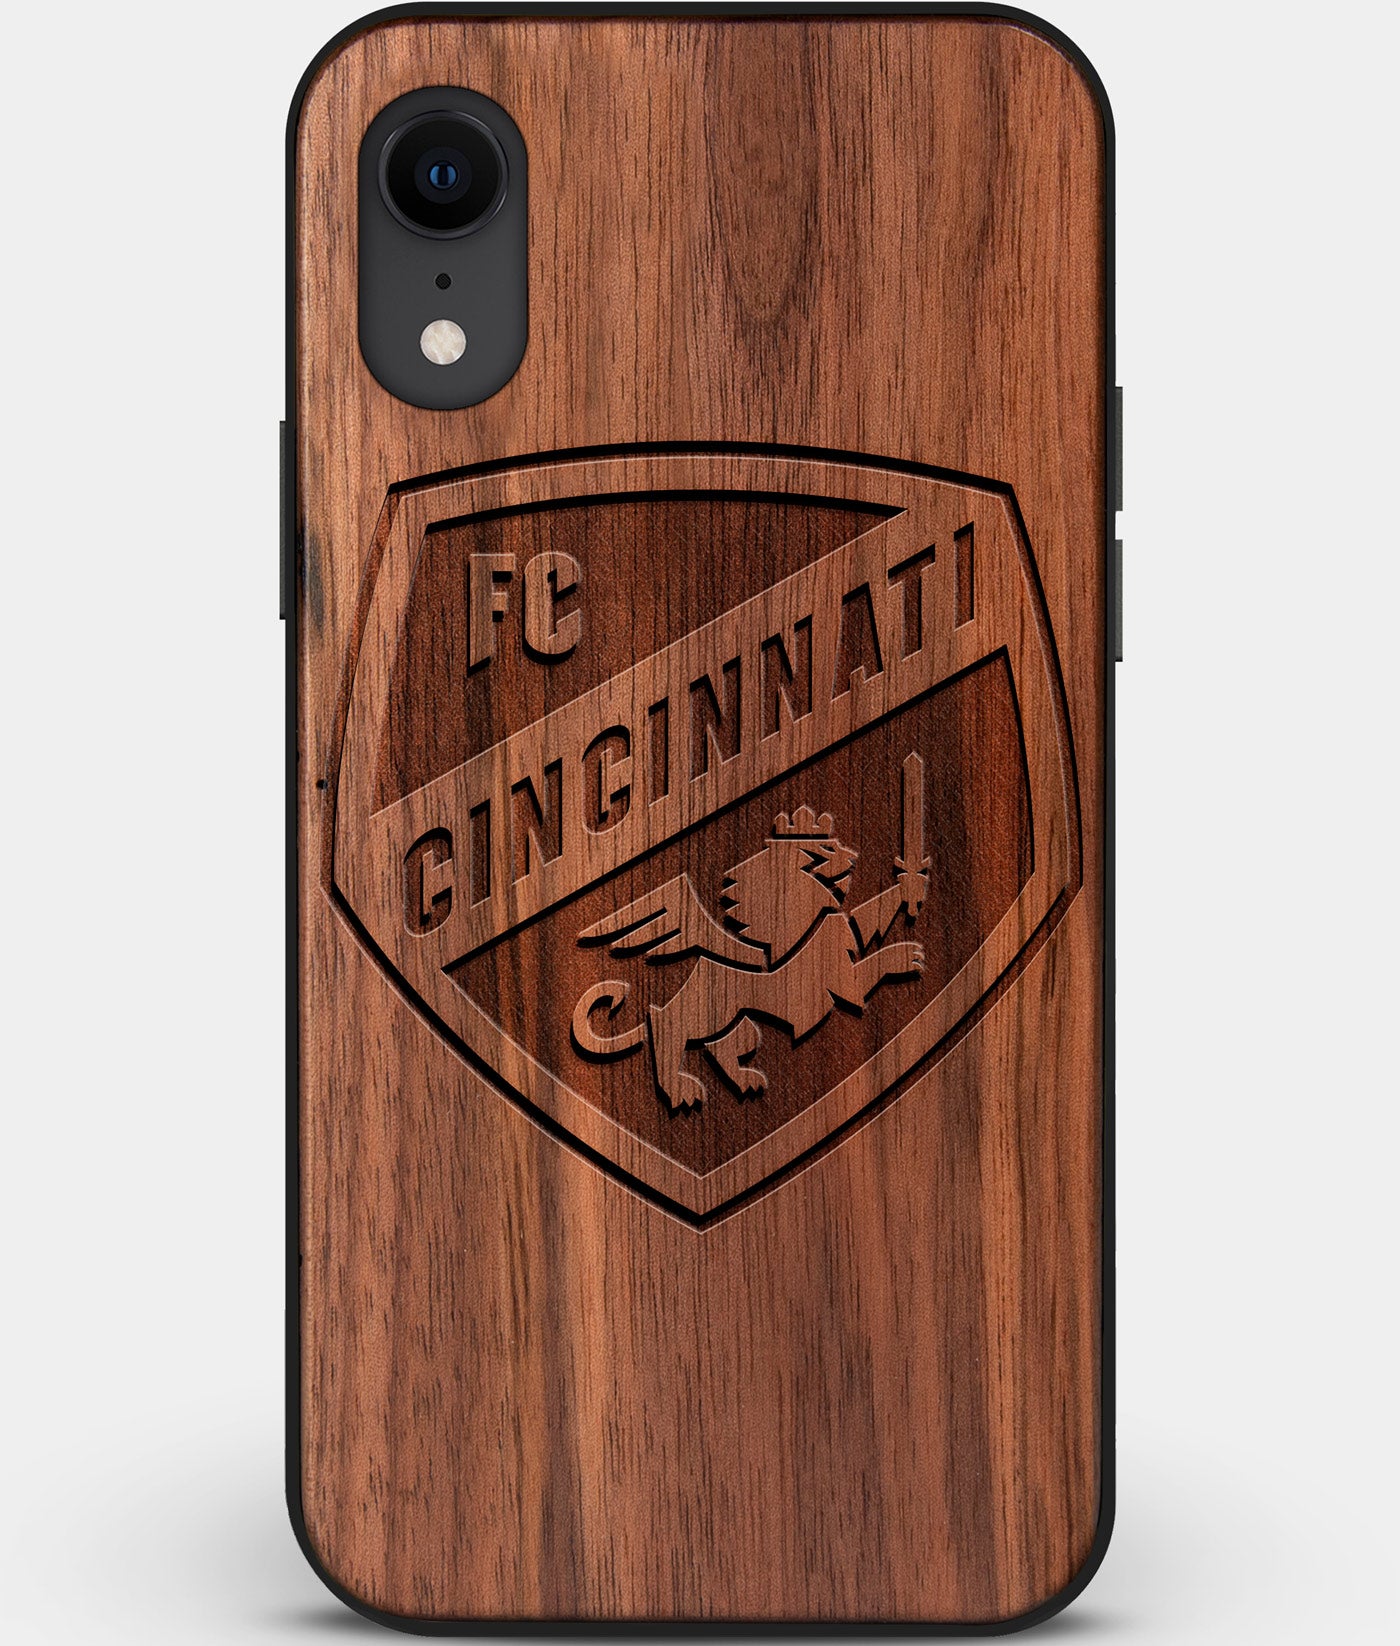 Custom Carved Wood FC Cincinnati iPhone XR Case | Personalized Walnut Wood FC Cincinnati Cover, Birthday Gift, Gifts For Him, Monogrammed Gift For Fan | by Engraved In Nature